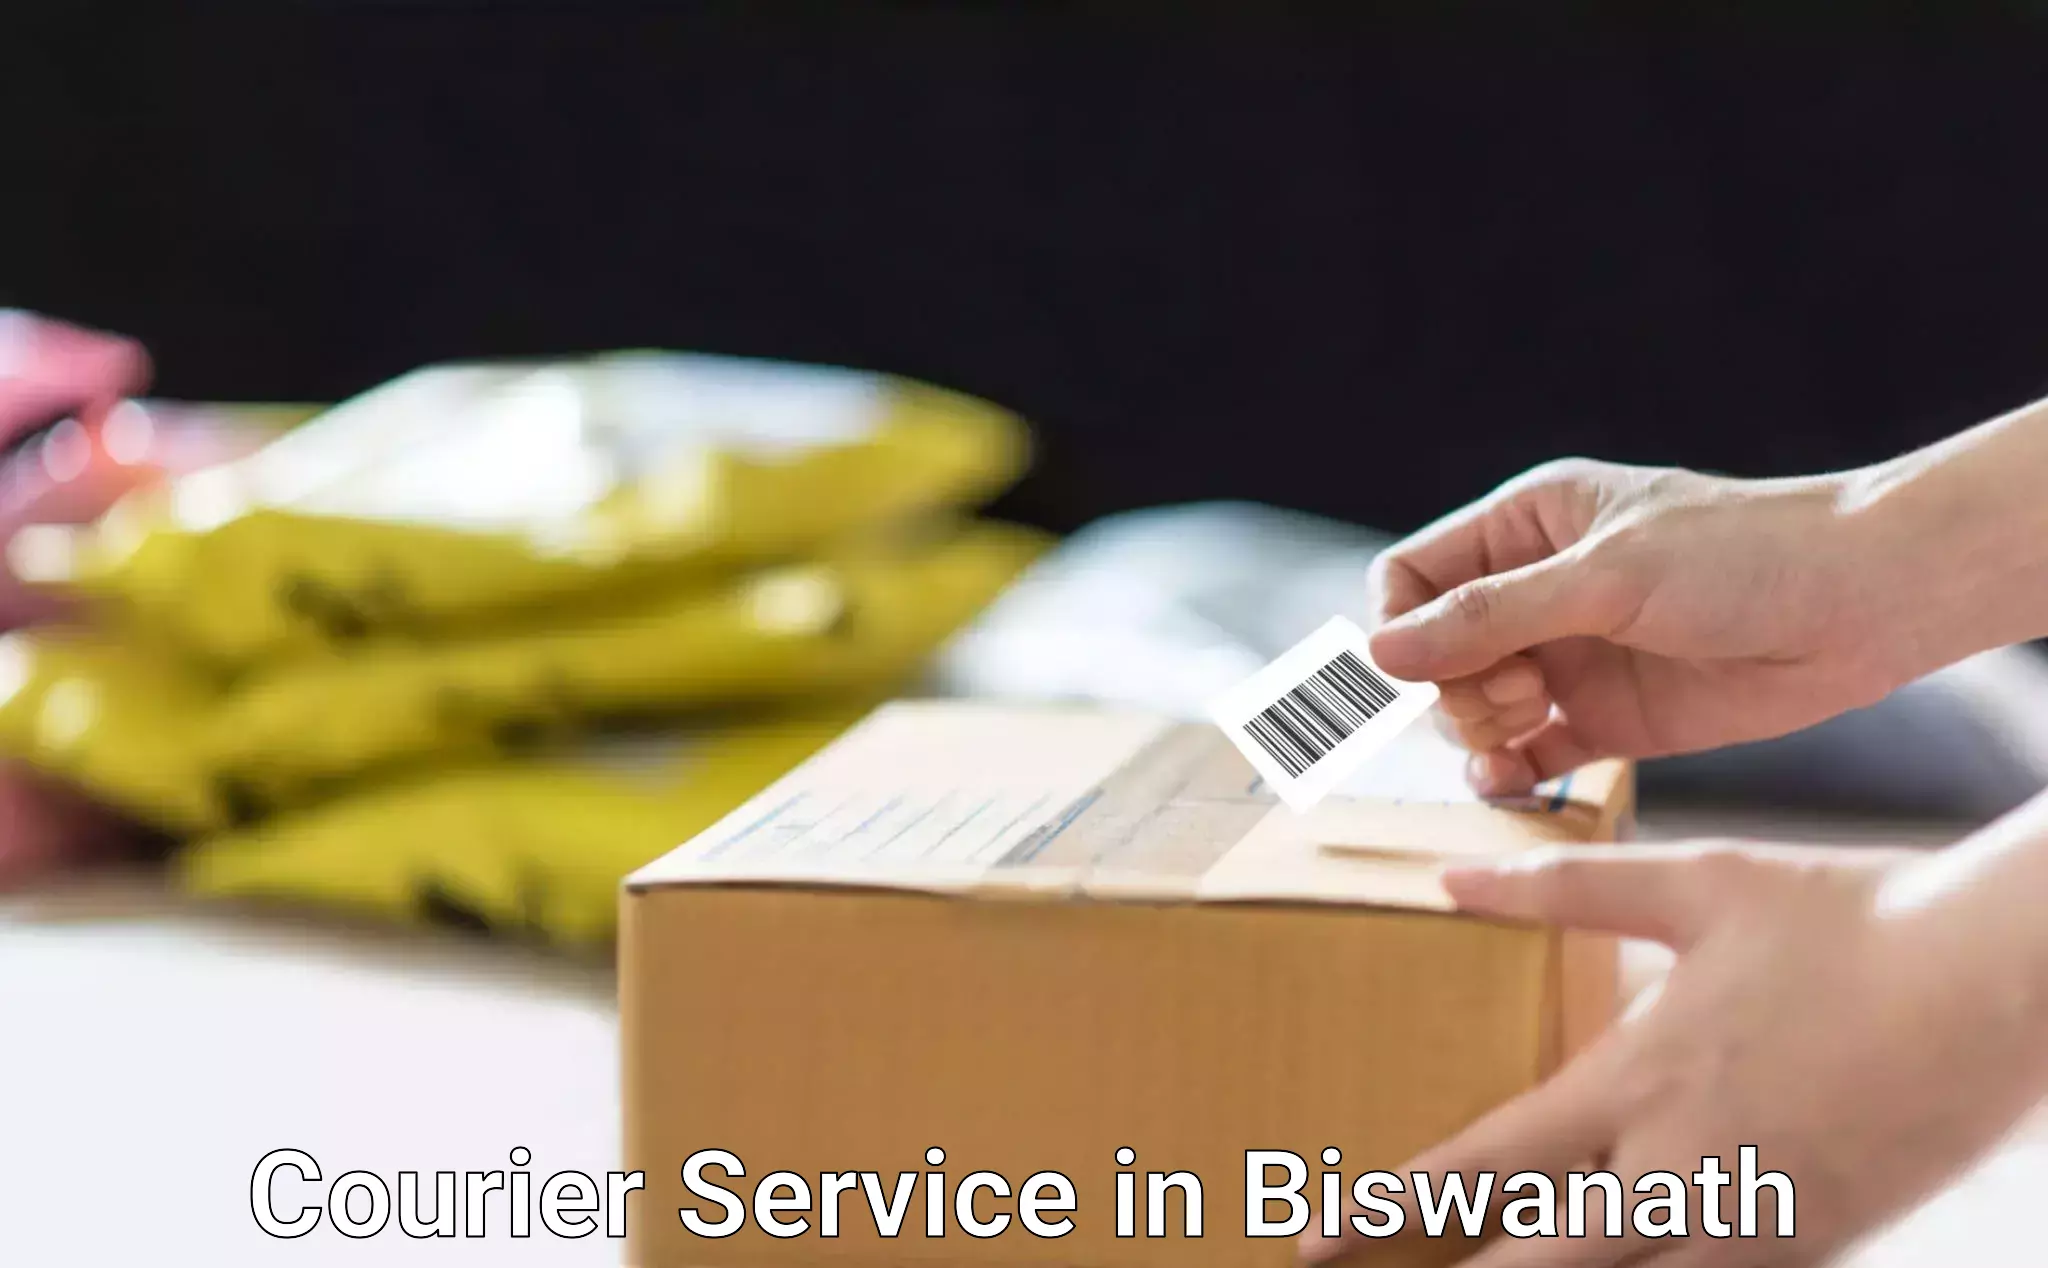 Affordable parcel rates in Biswanath